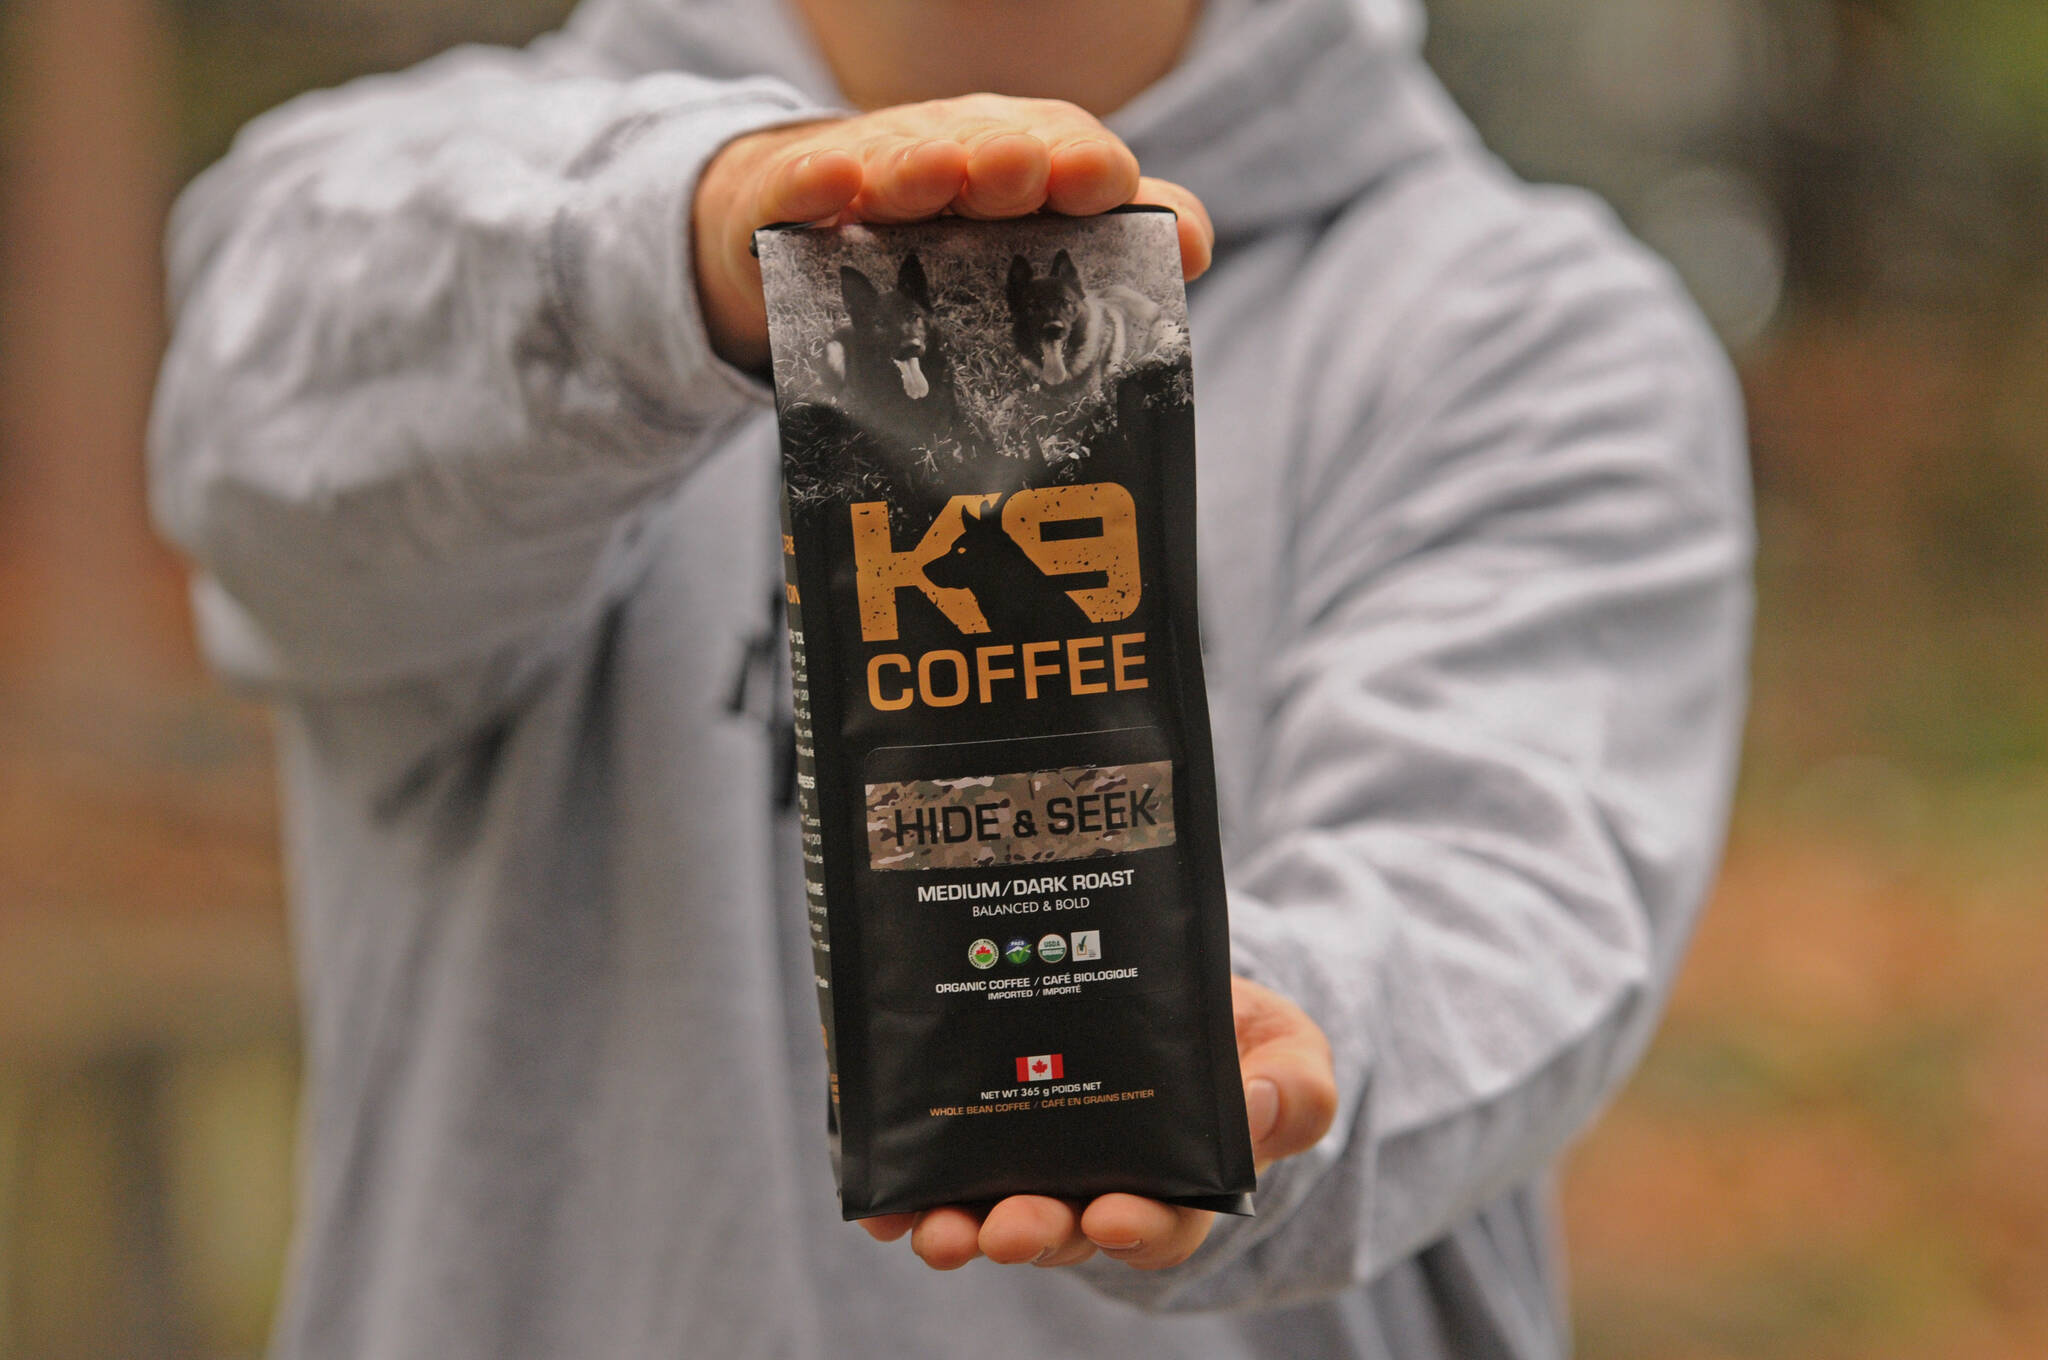 K9 Coffee is one of the products folks can buy from Support Retired Legends. The local business raises money for a charity called Ned’s Wish which provides financial support to help pay for the medical bills of retired service dogs. (Jenna Hauck/ Chilliwack Progress)